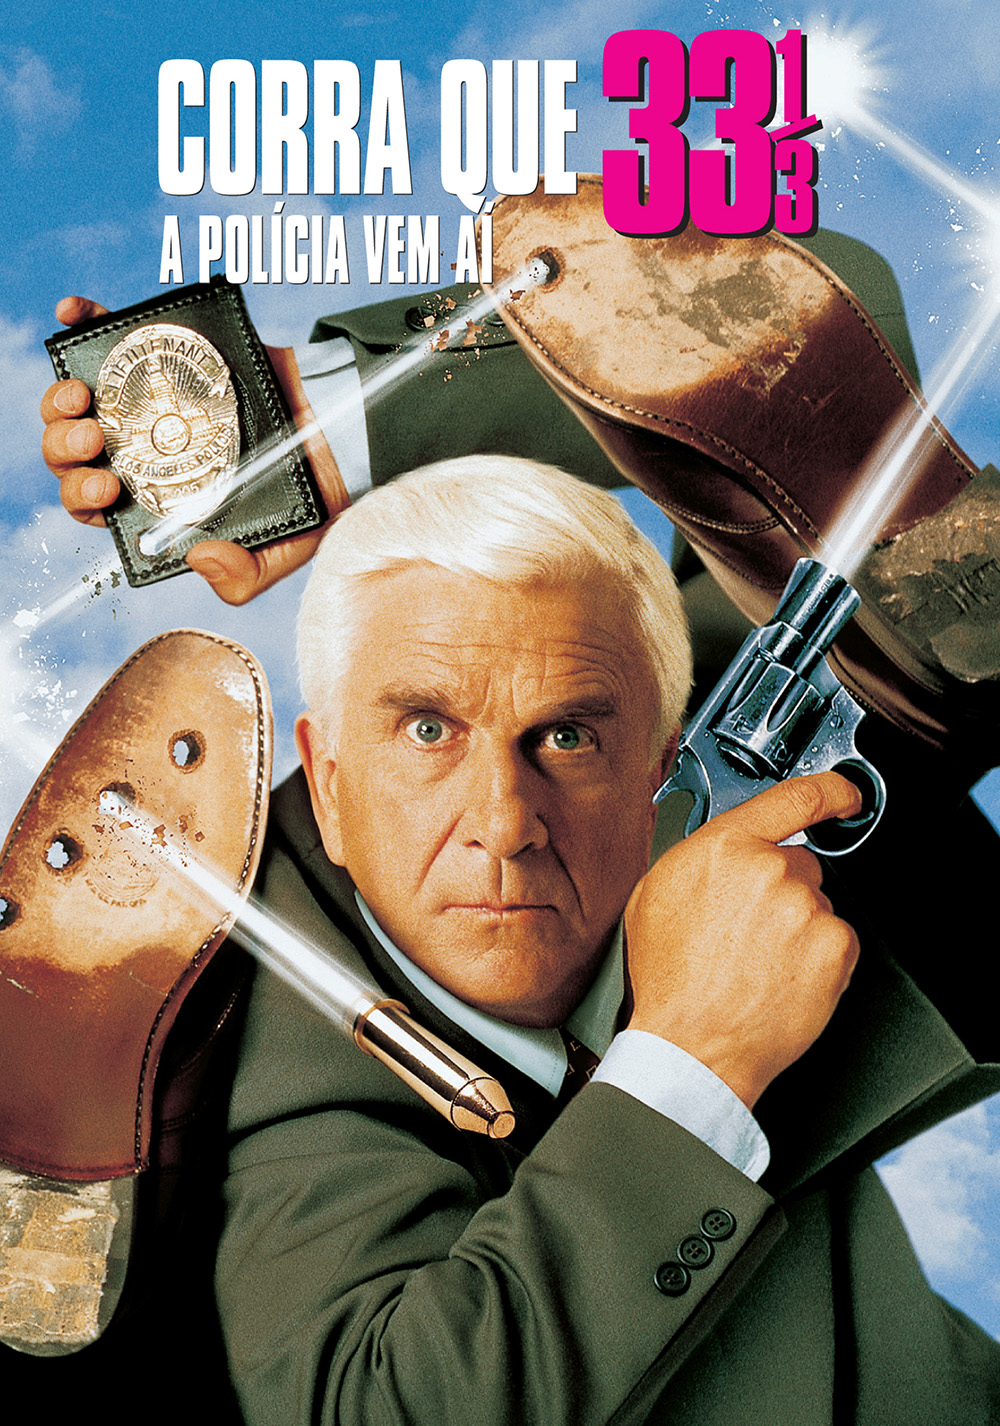 Naked Gun 33 1/3: The Final Insult Movie Poster - ID: 112066 - Image Abyss.